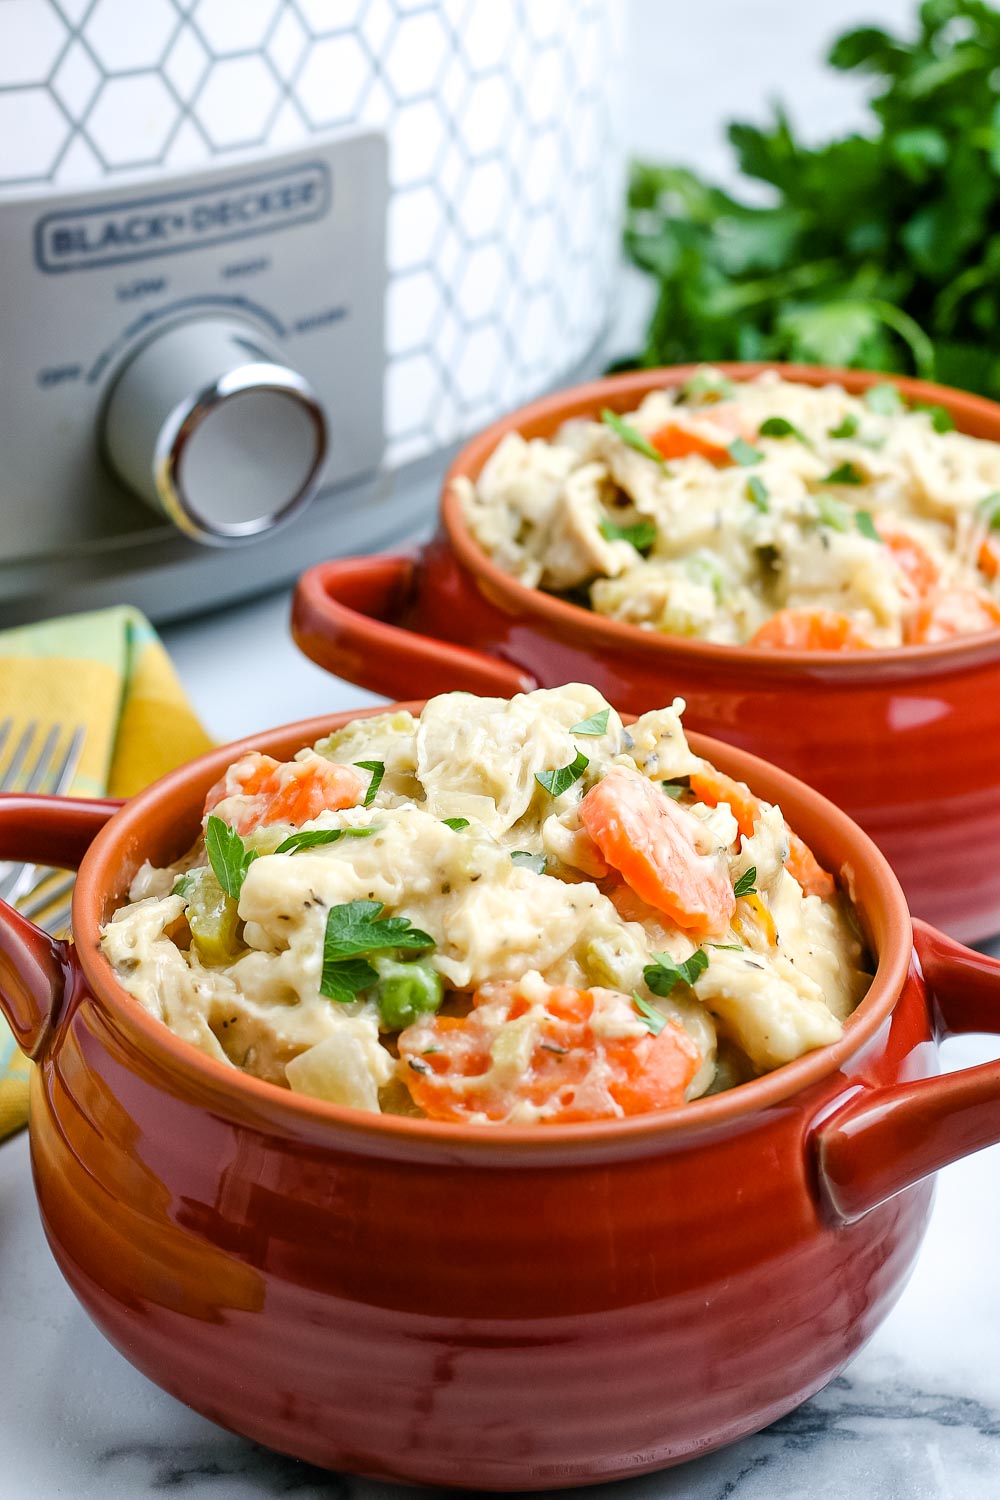 A bowl of Crockpot Chicken and Dumplings made easy using canned biscuits.